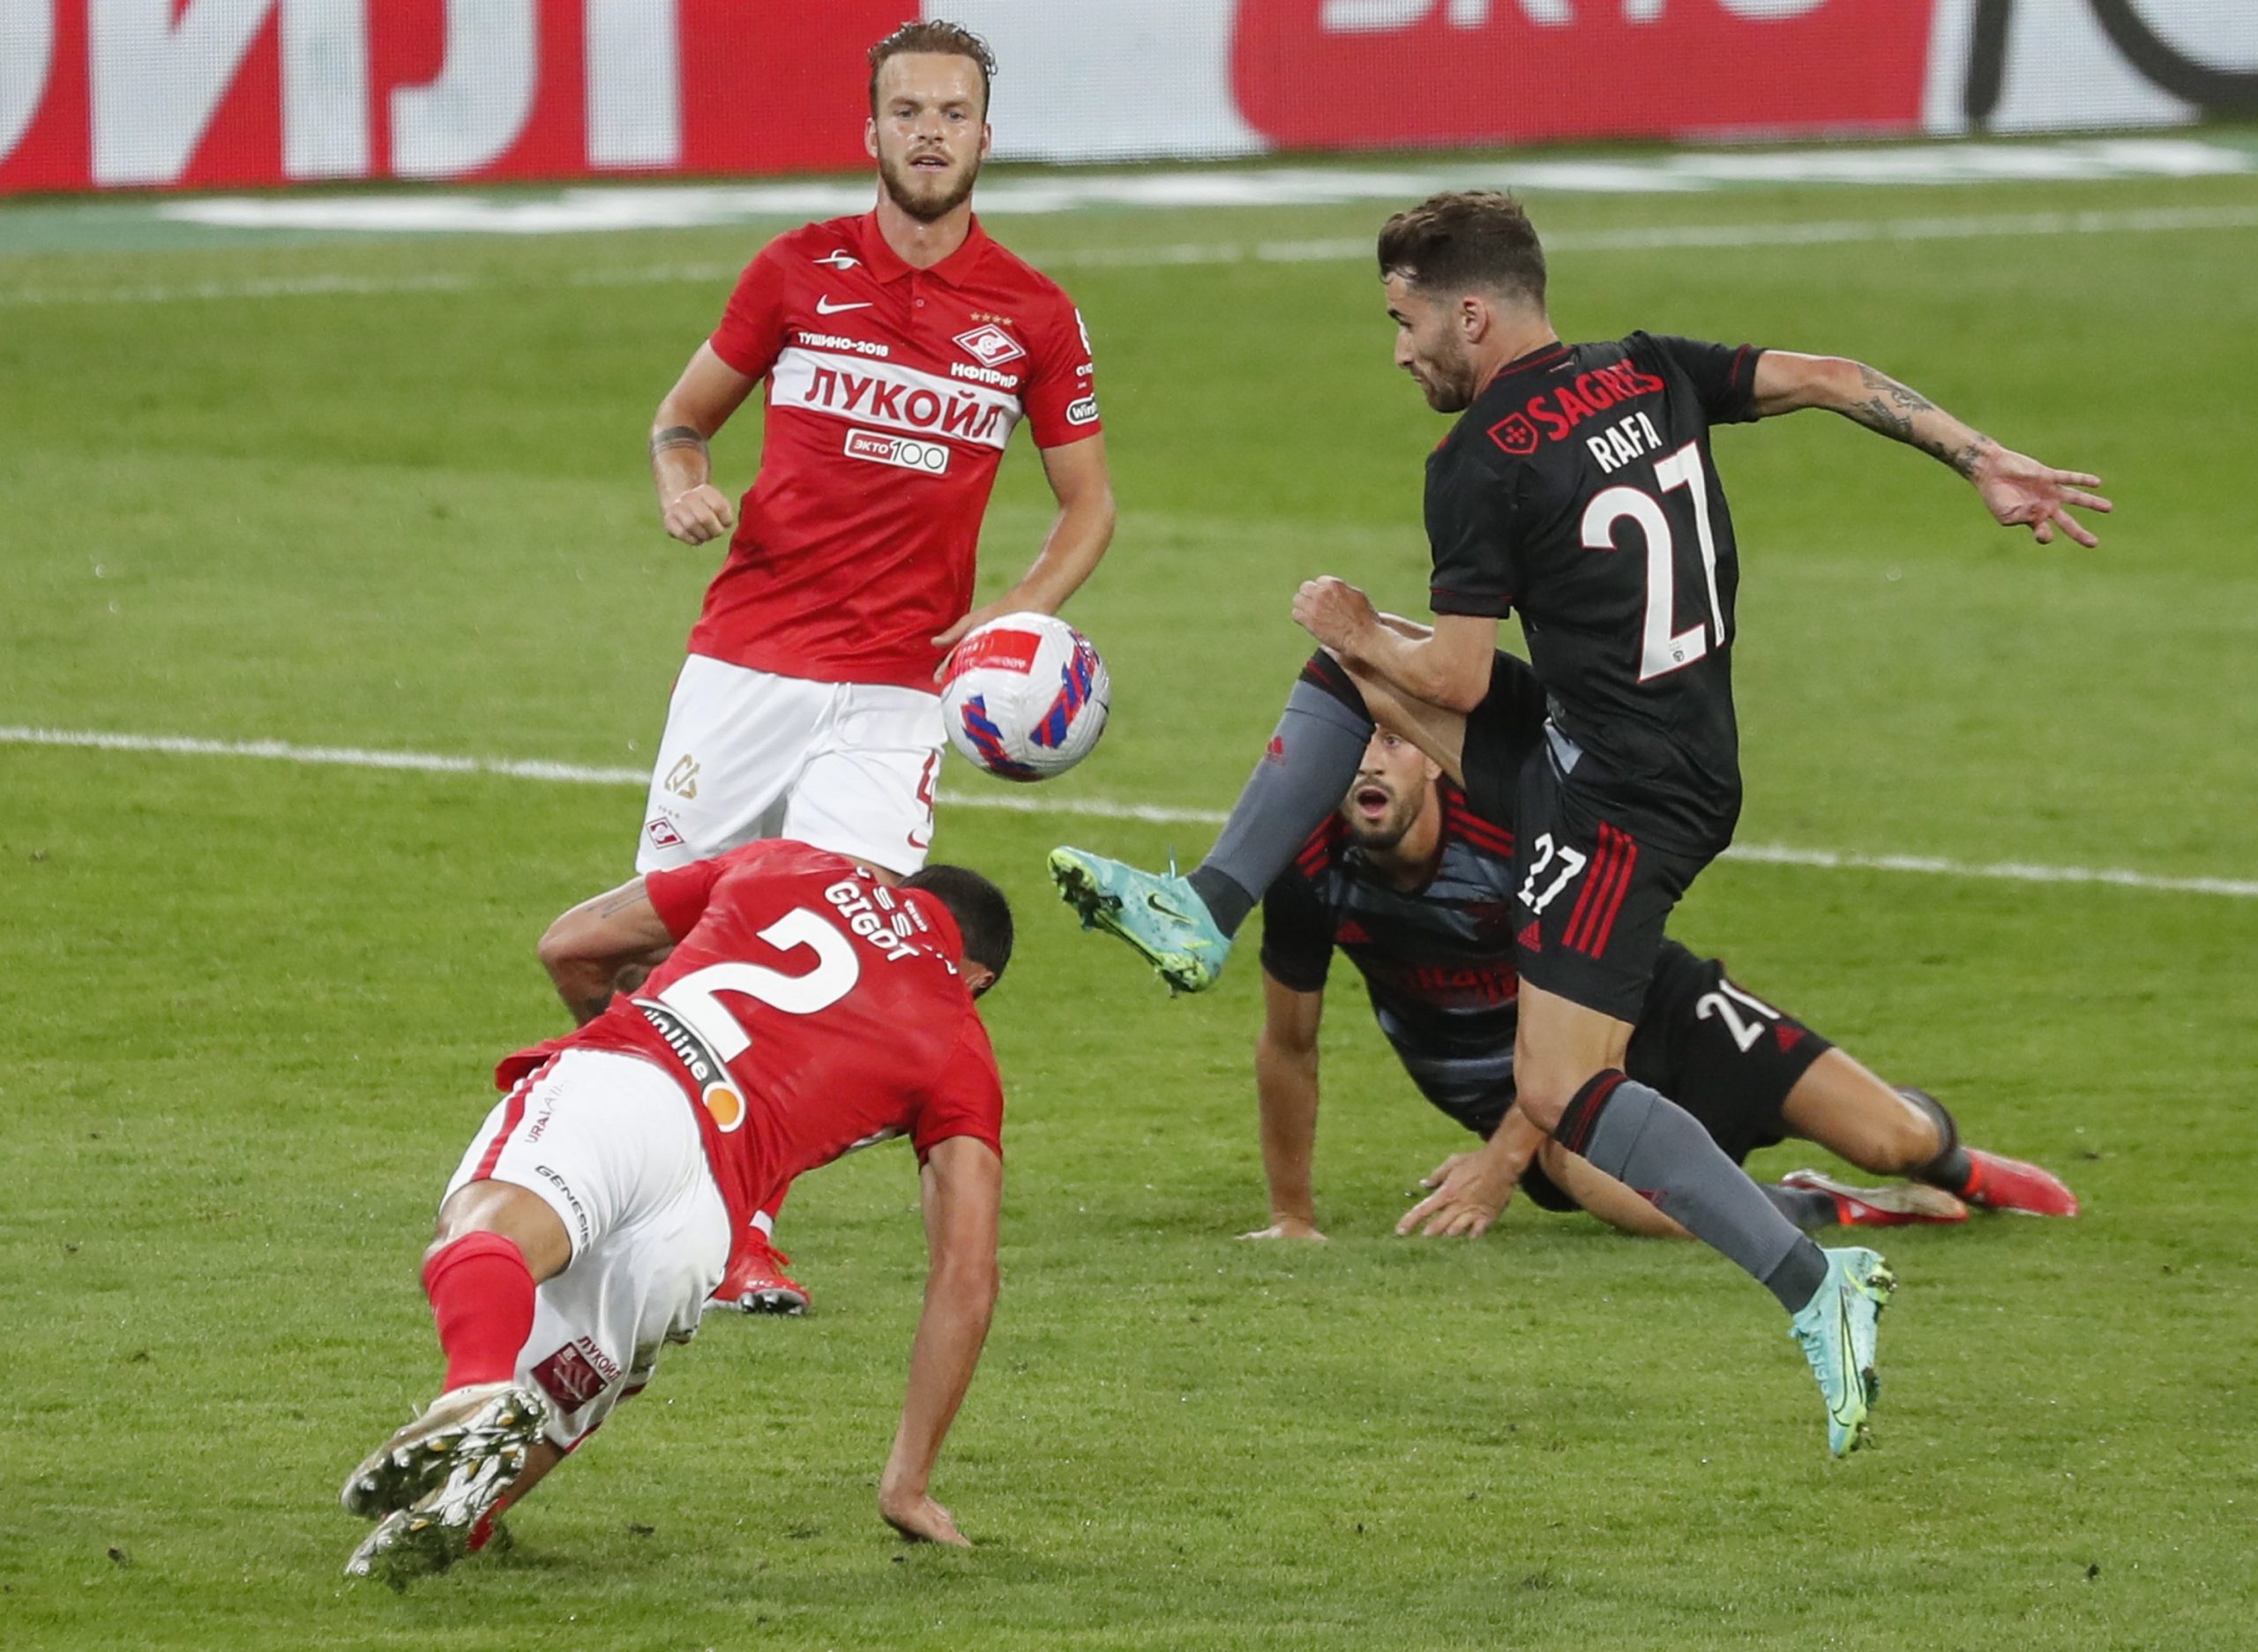 soi-keo-benfica-vs-spartak-moscow-2h-ngay-11-8-2021-2